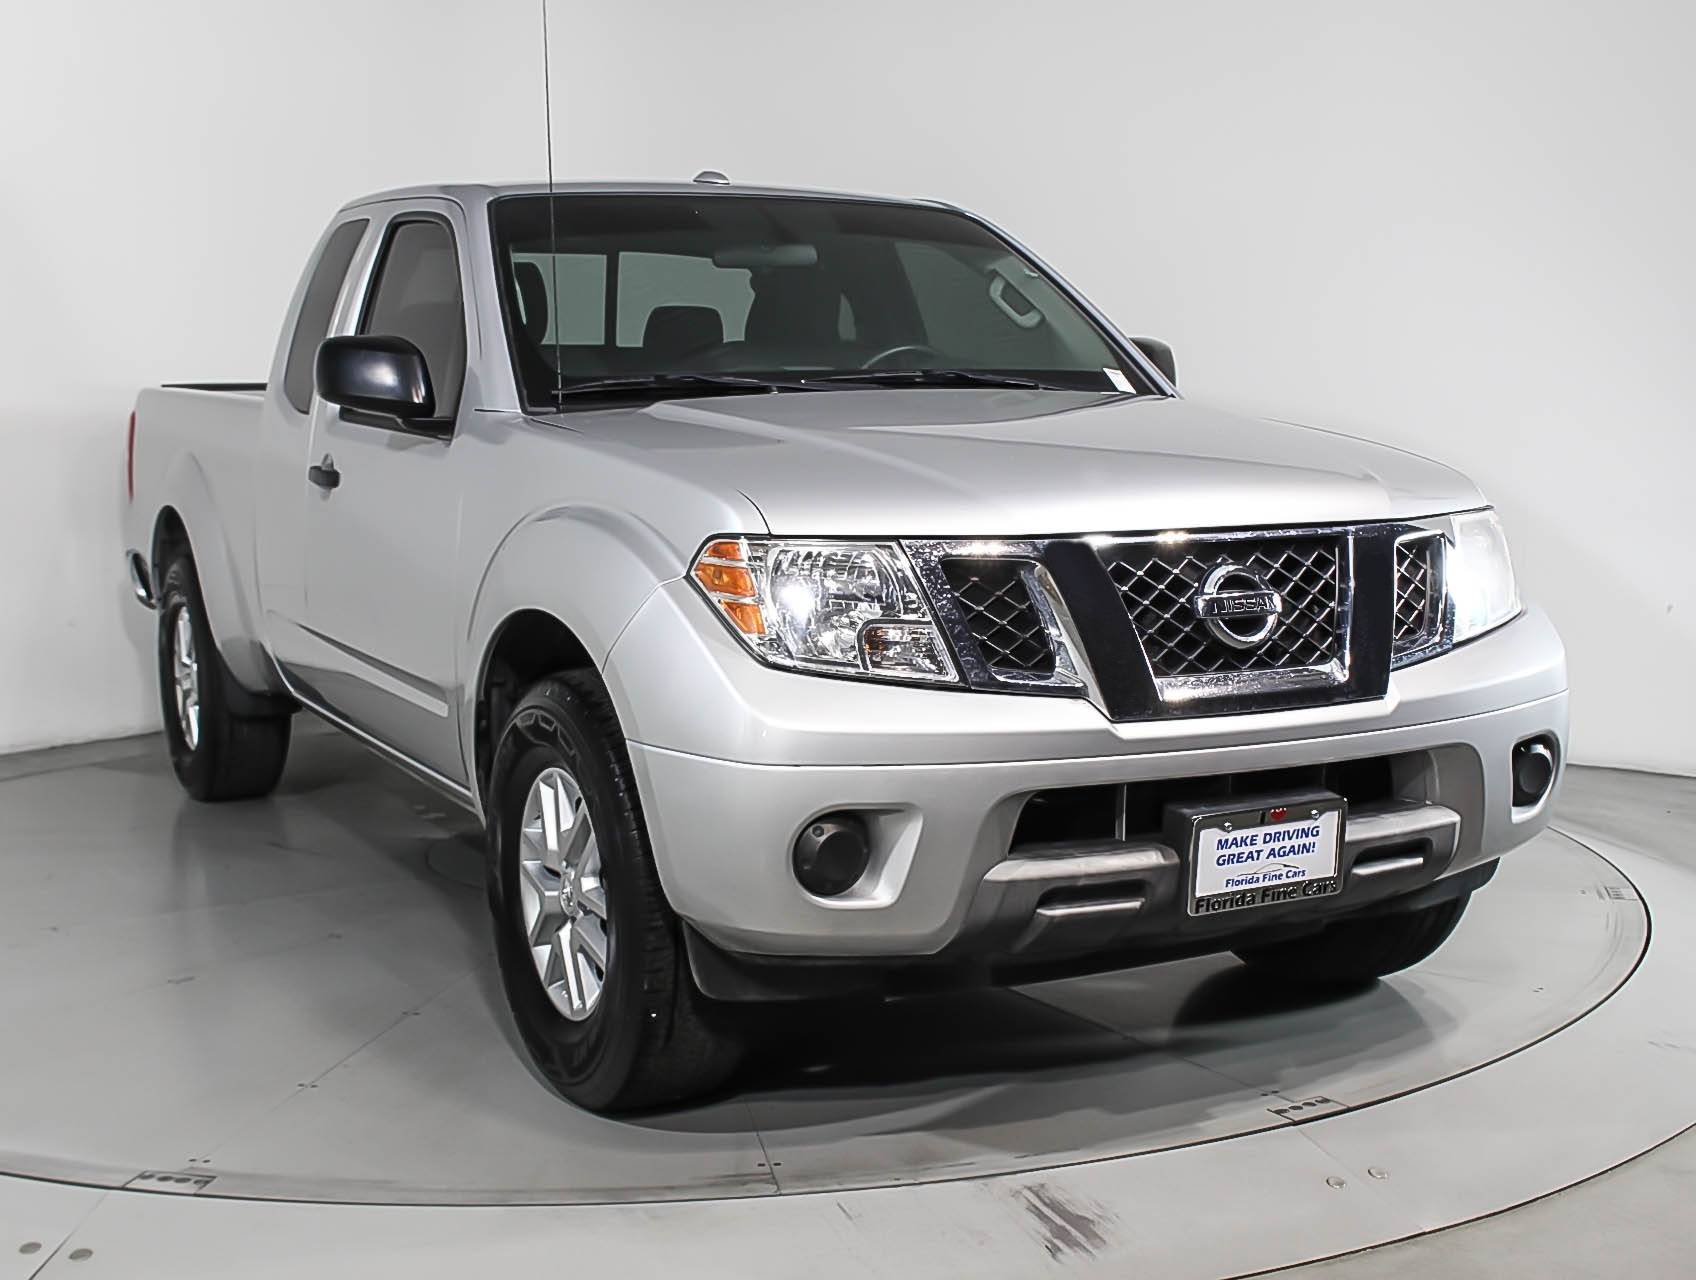 Florida Fine Cars - Used NISSAN FRONTIER 2017 MIAMI Sv King Cab